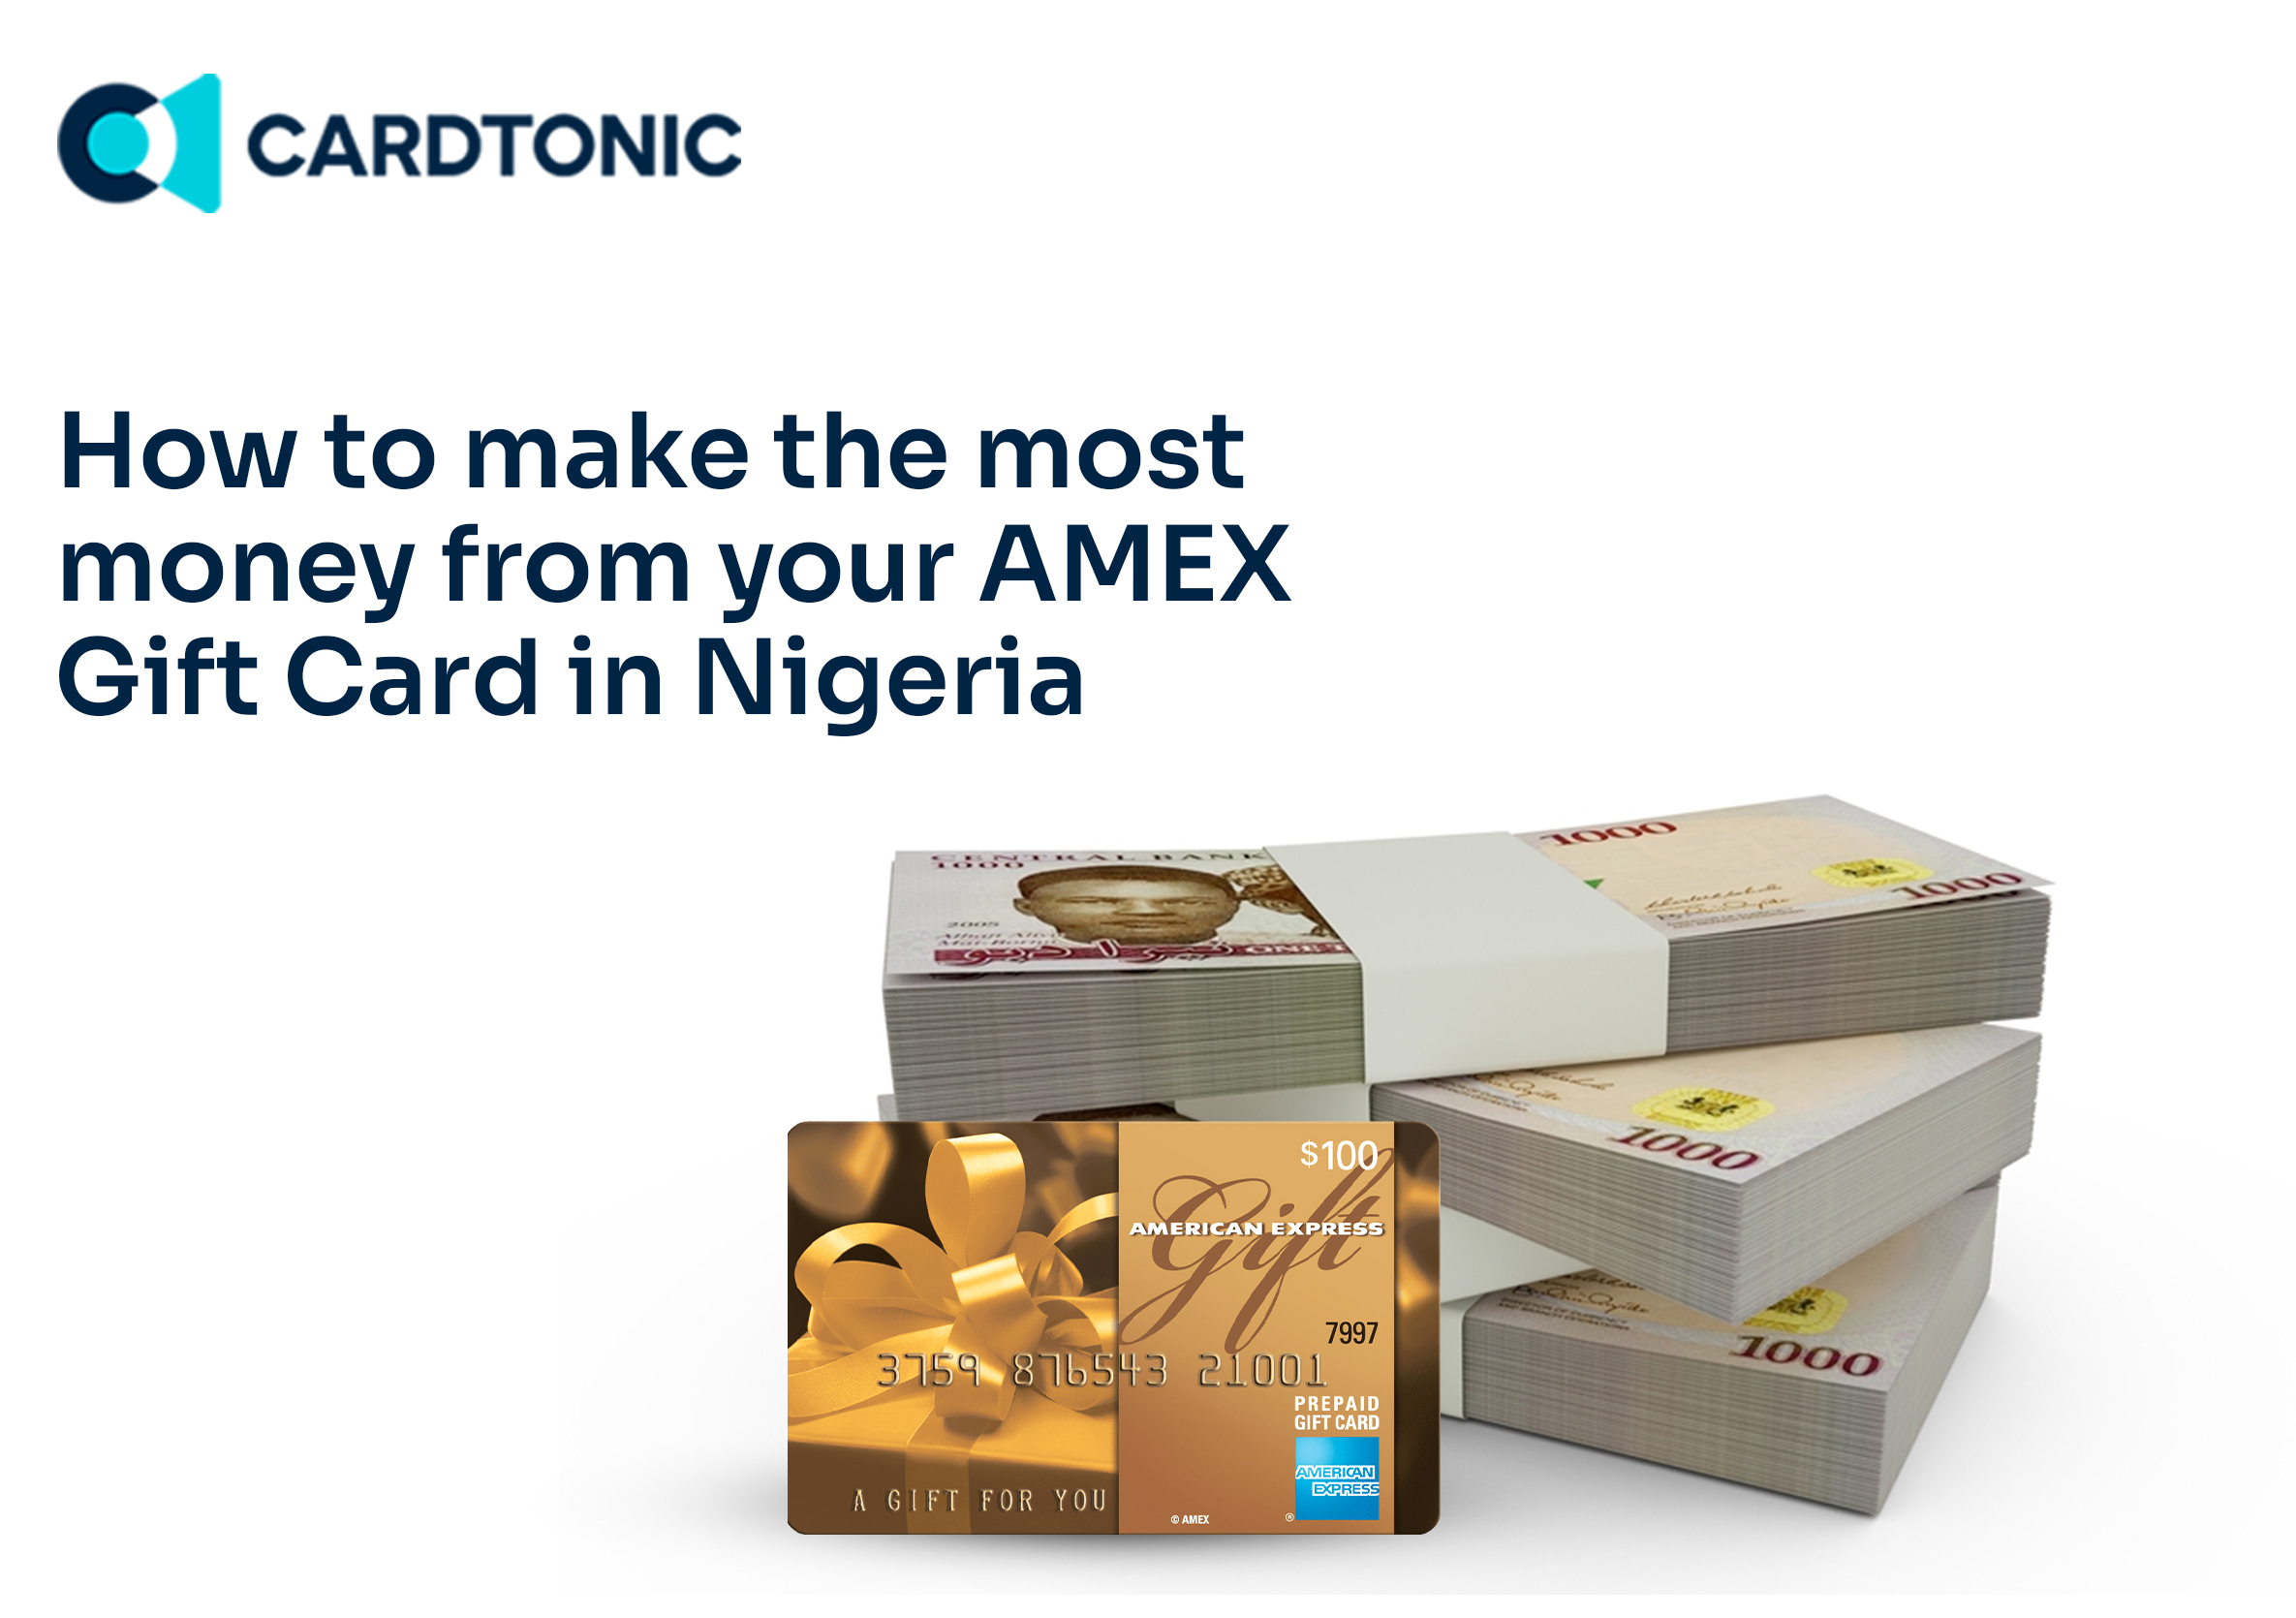 How To Make Money From Your AMEX Gift Card in Nigeria